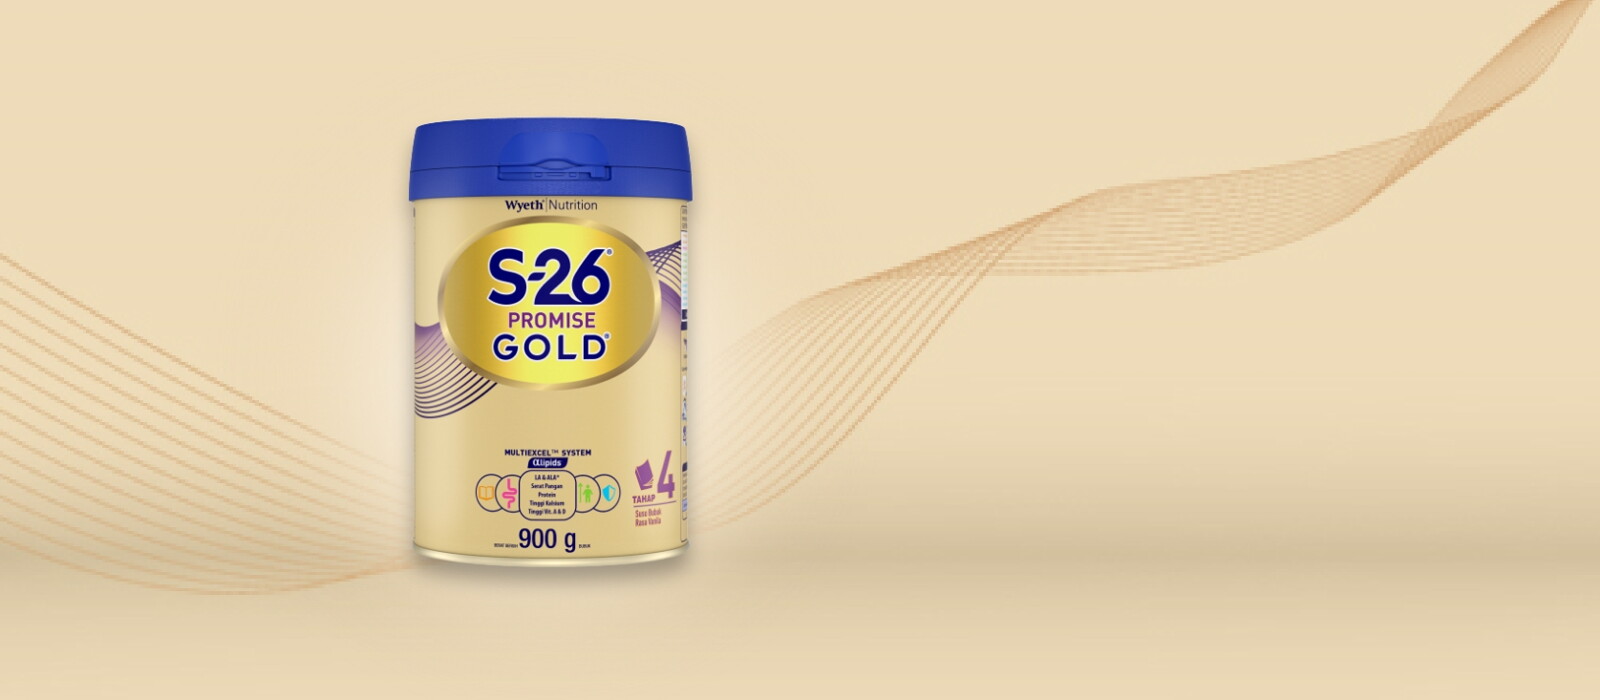 Product s26 Gold Promise